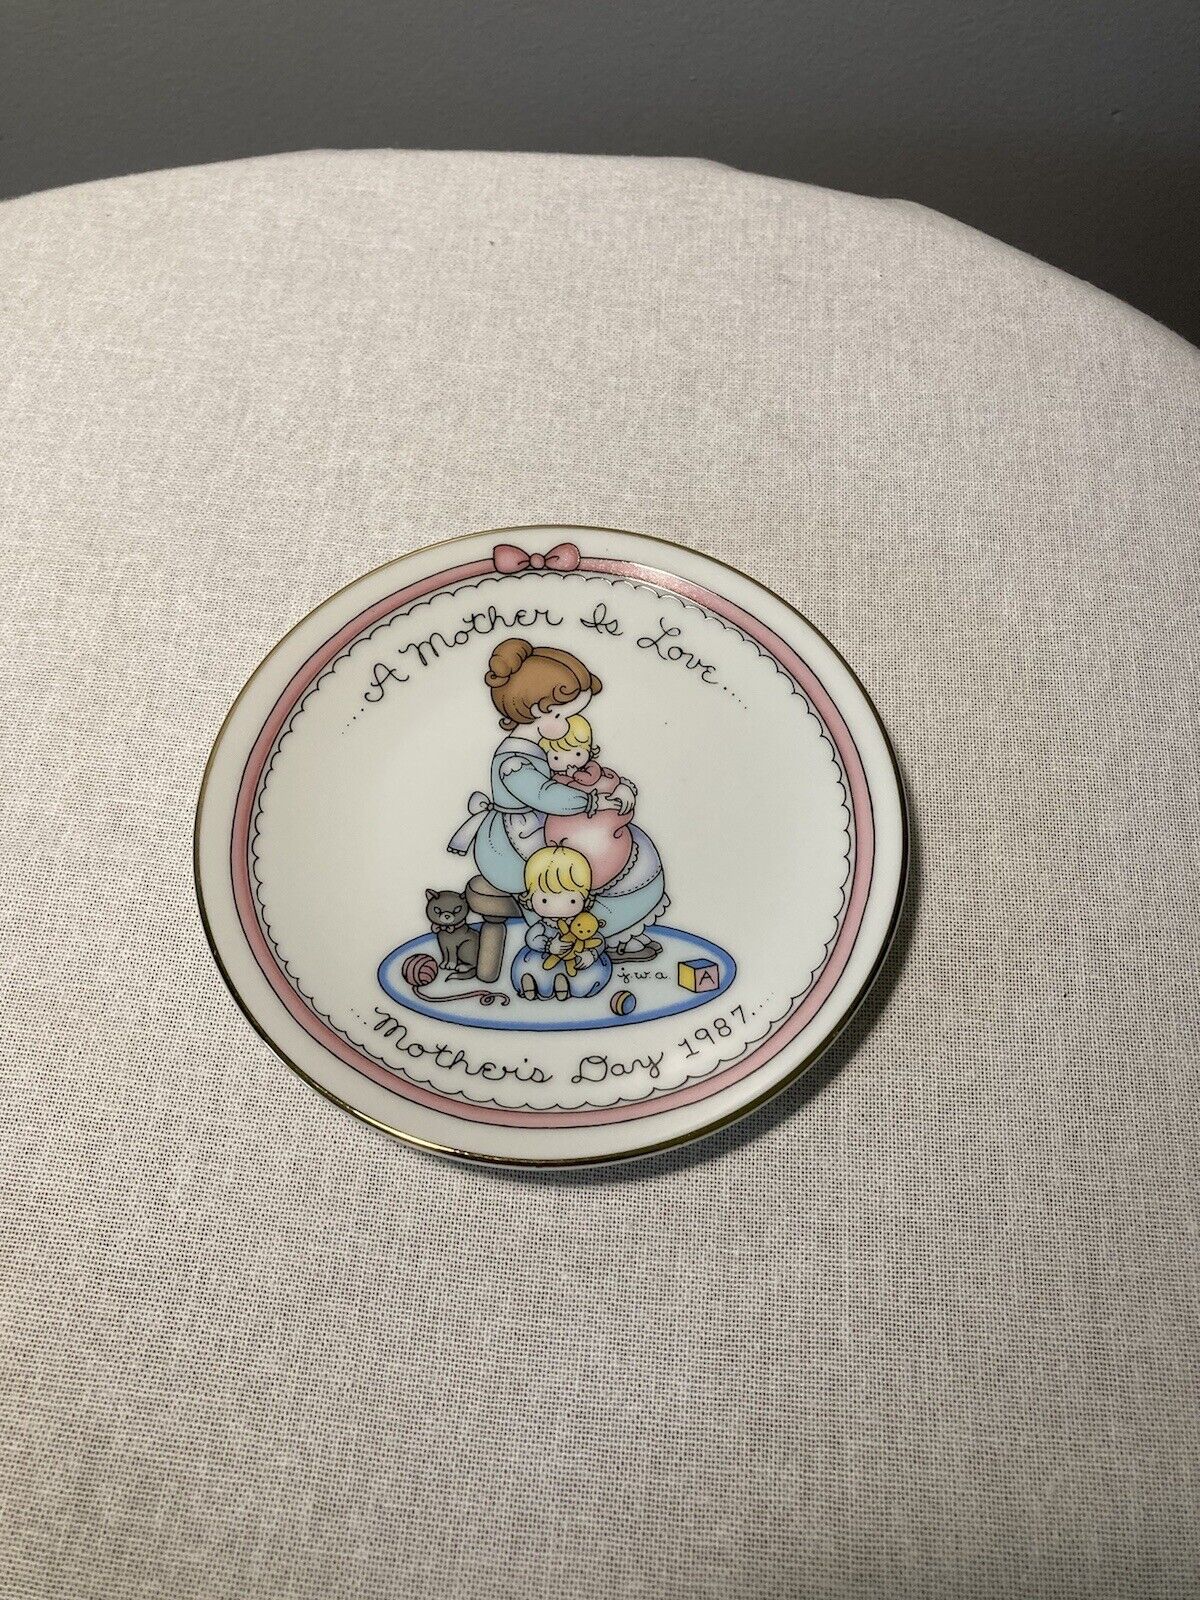 1987 Mother’s Day Plate